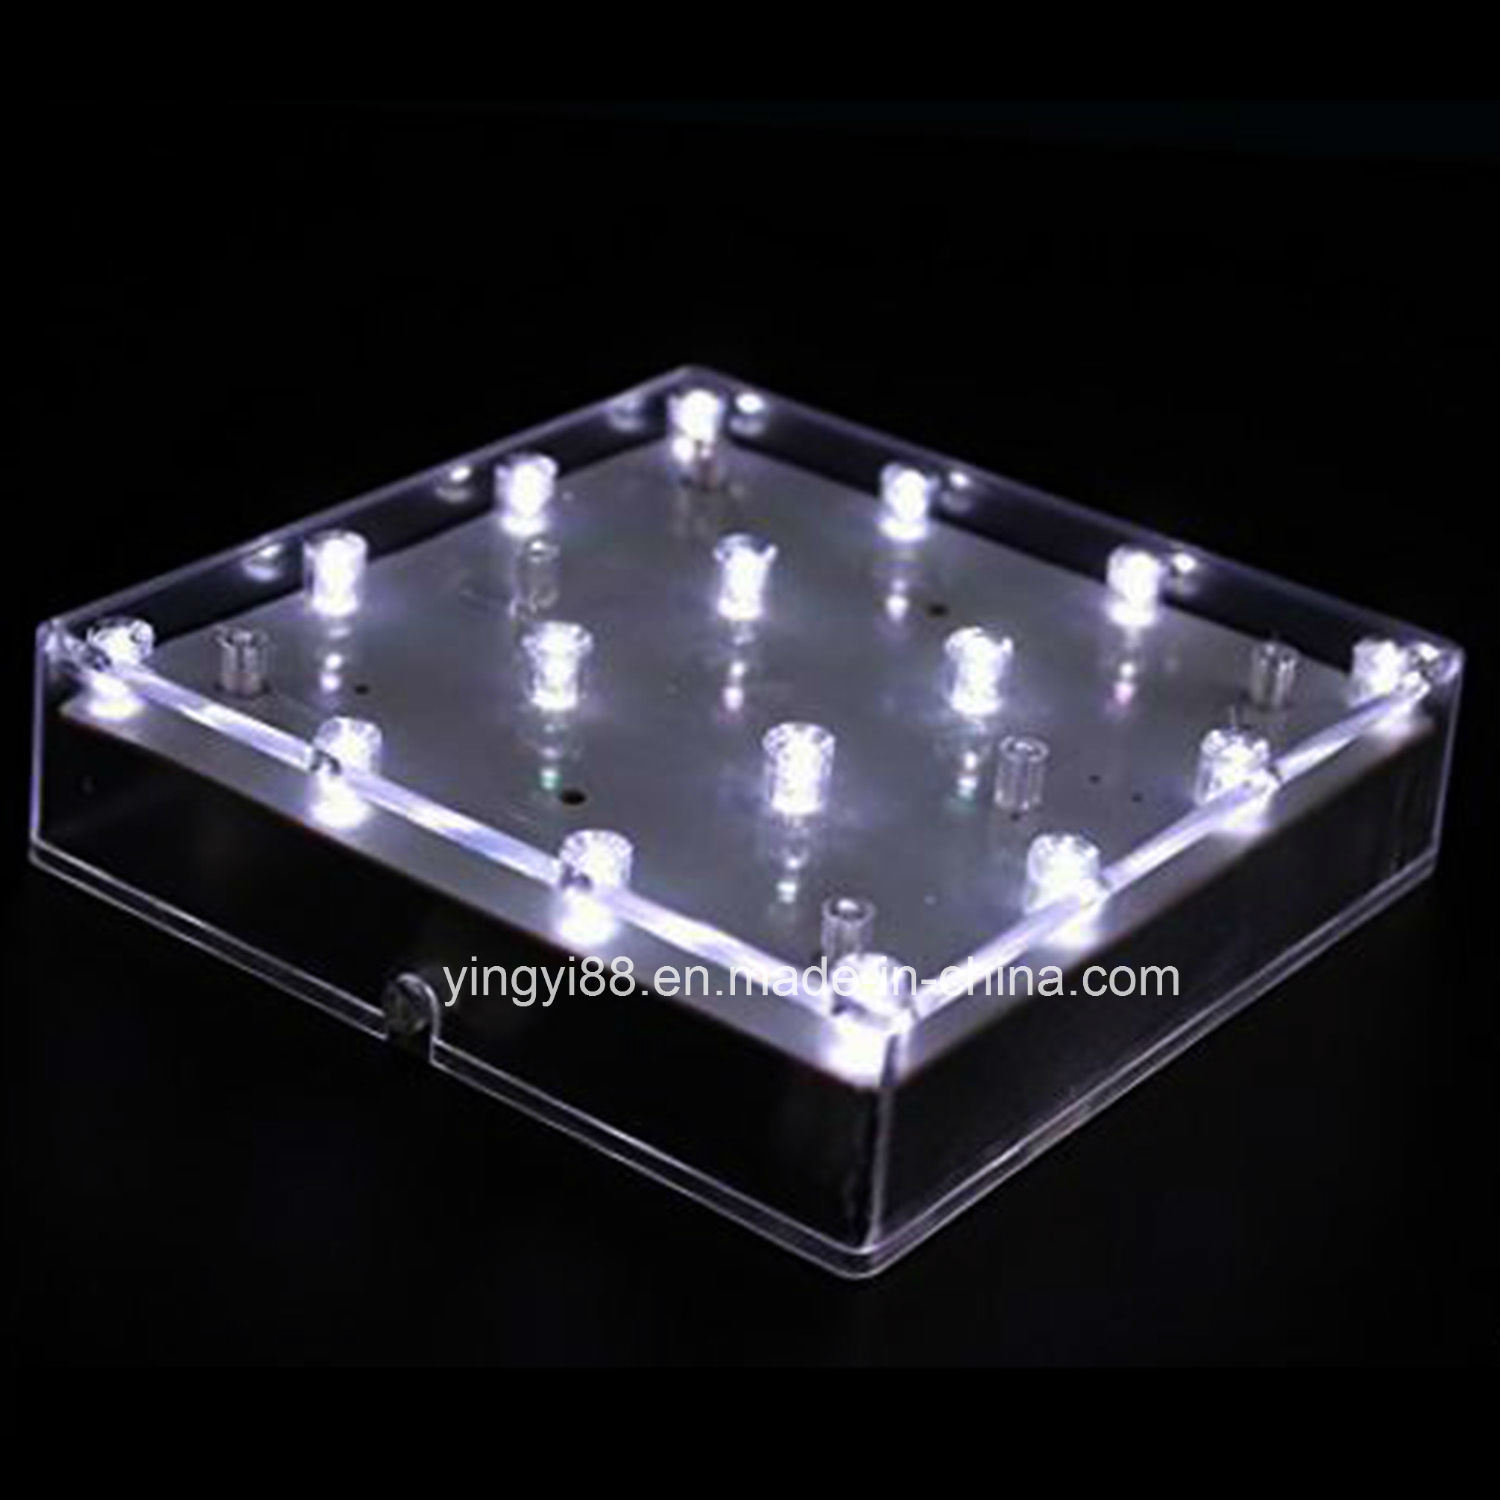 /proimages/2f0j00pOUtBVeYITgD/best-selling-led-light-base-for-acrylic.jpg